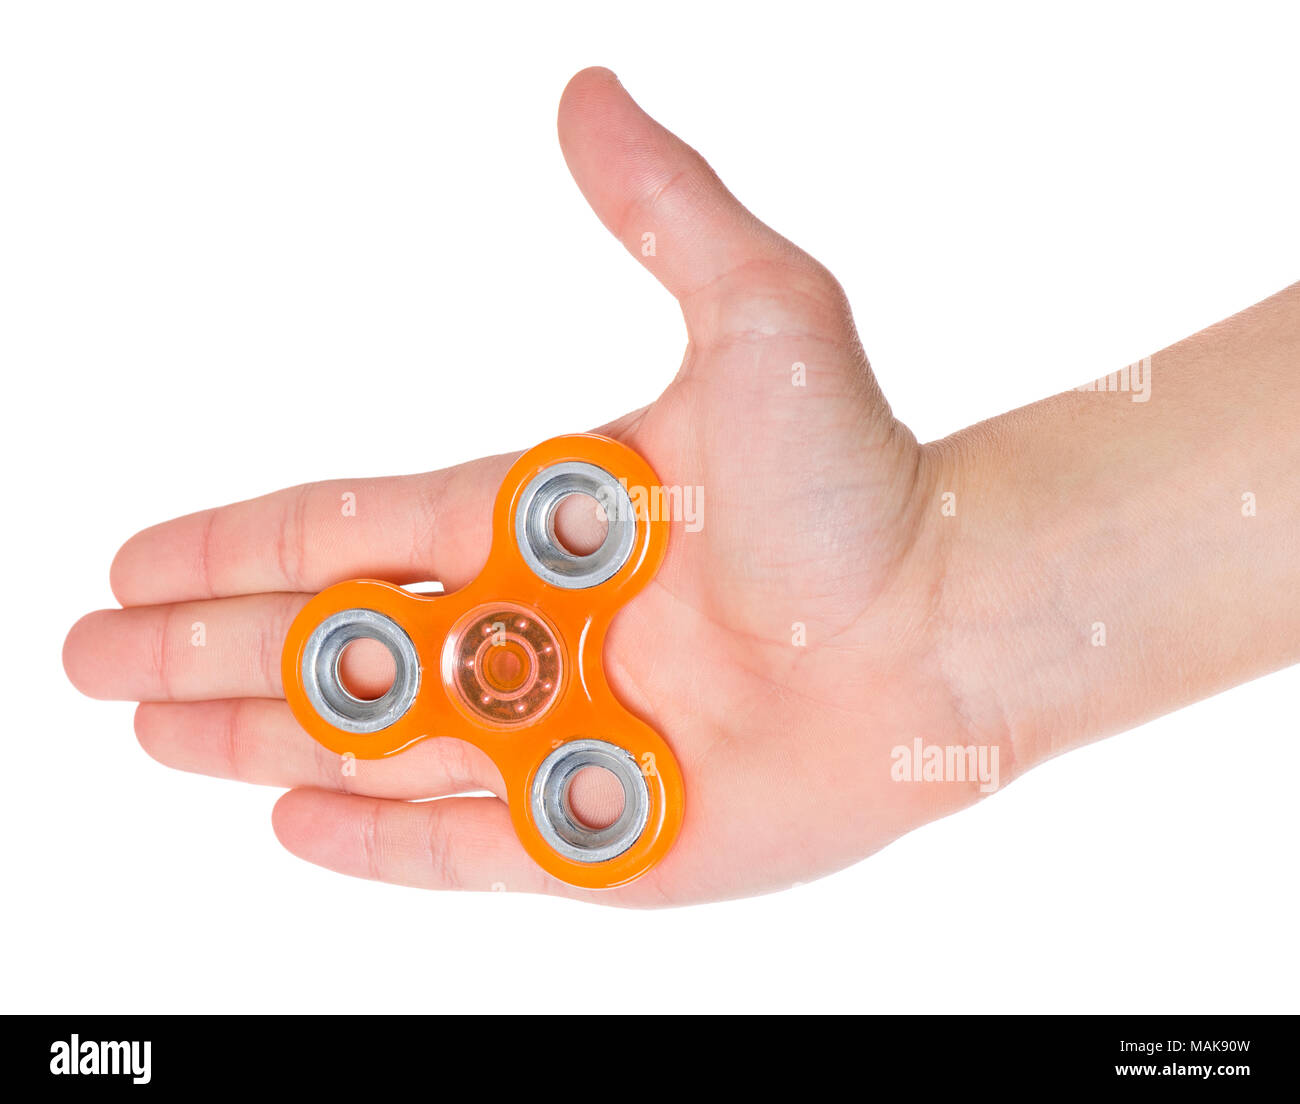 Hand holding spinner toy Stock Photo